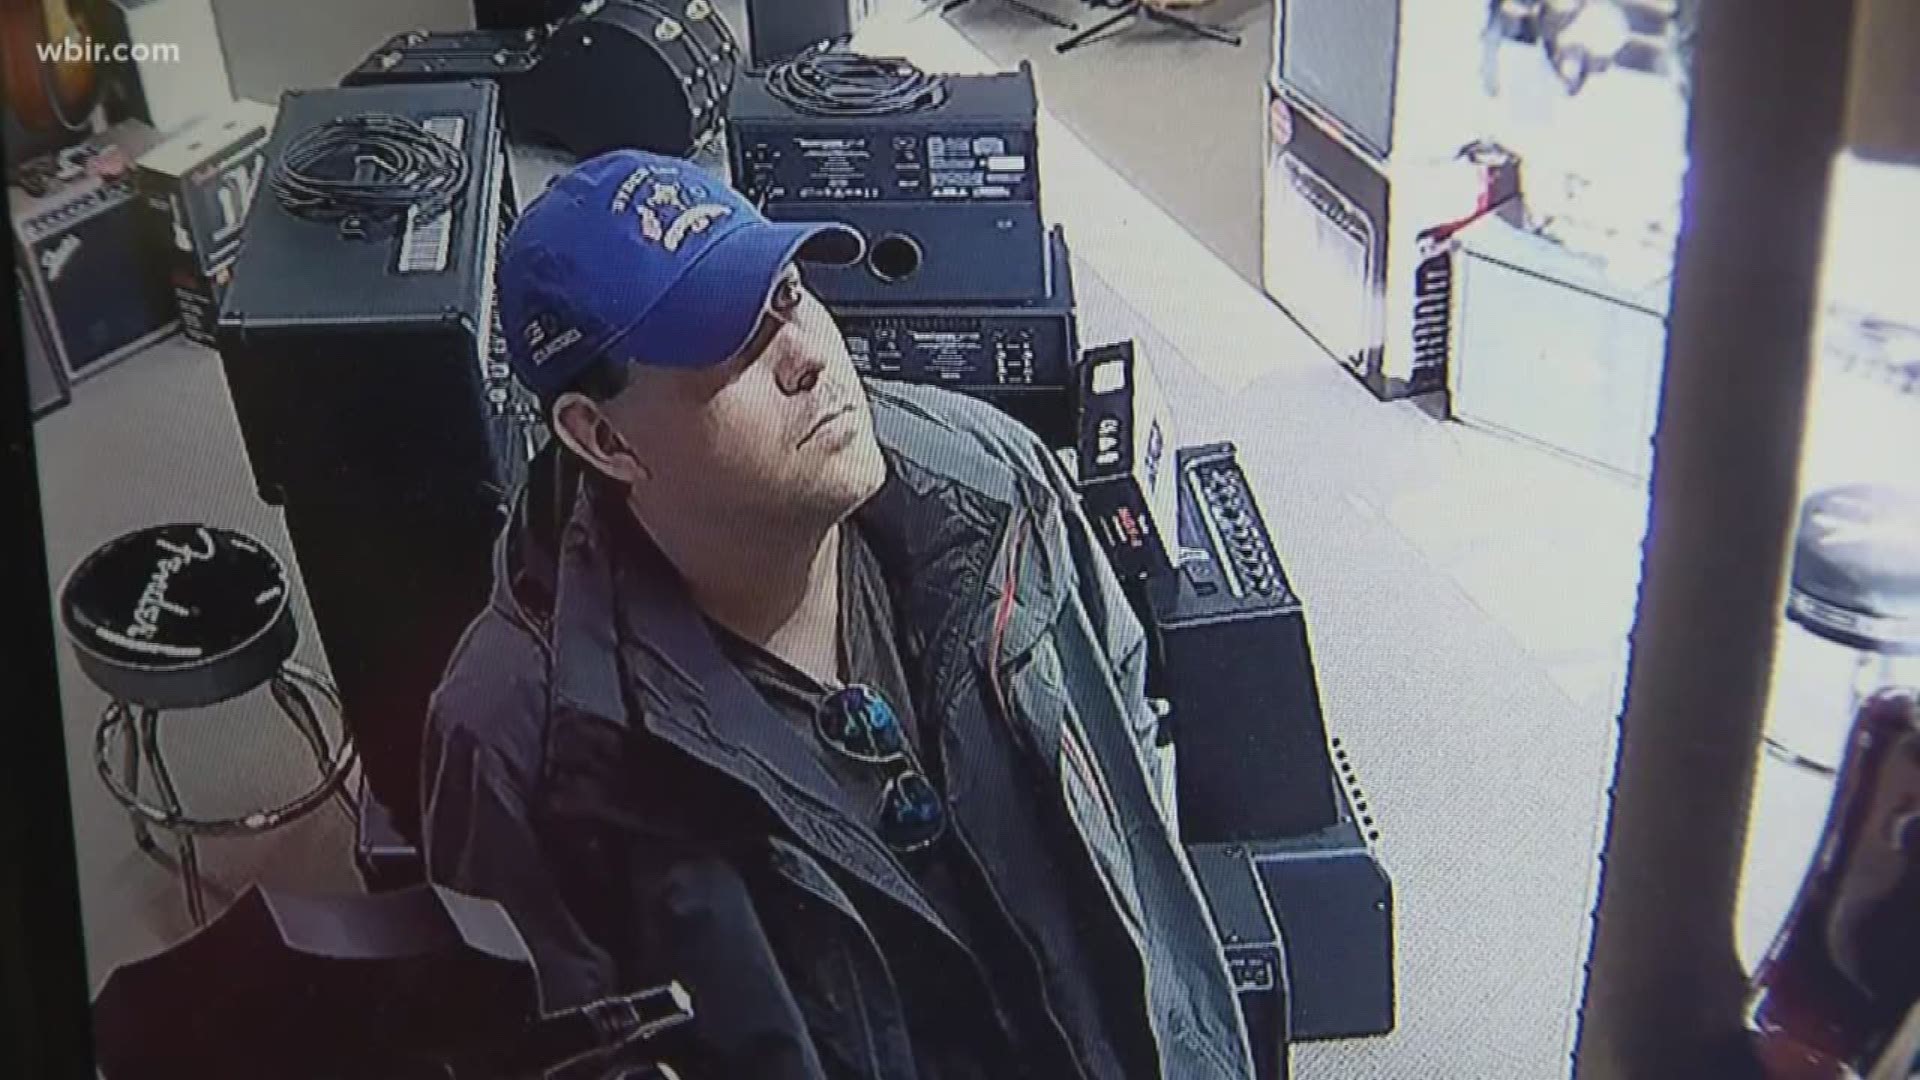 Store owners say security cameras catch a man stealing guitars by putting them in his pants.